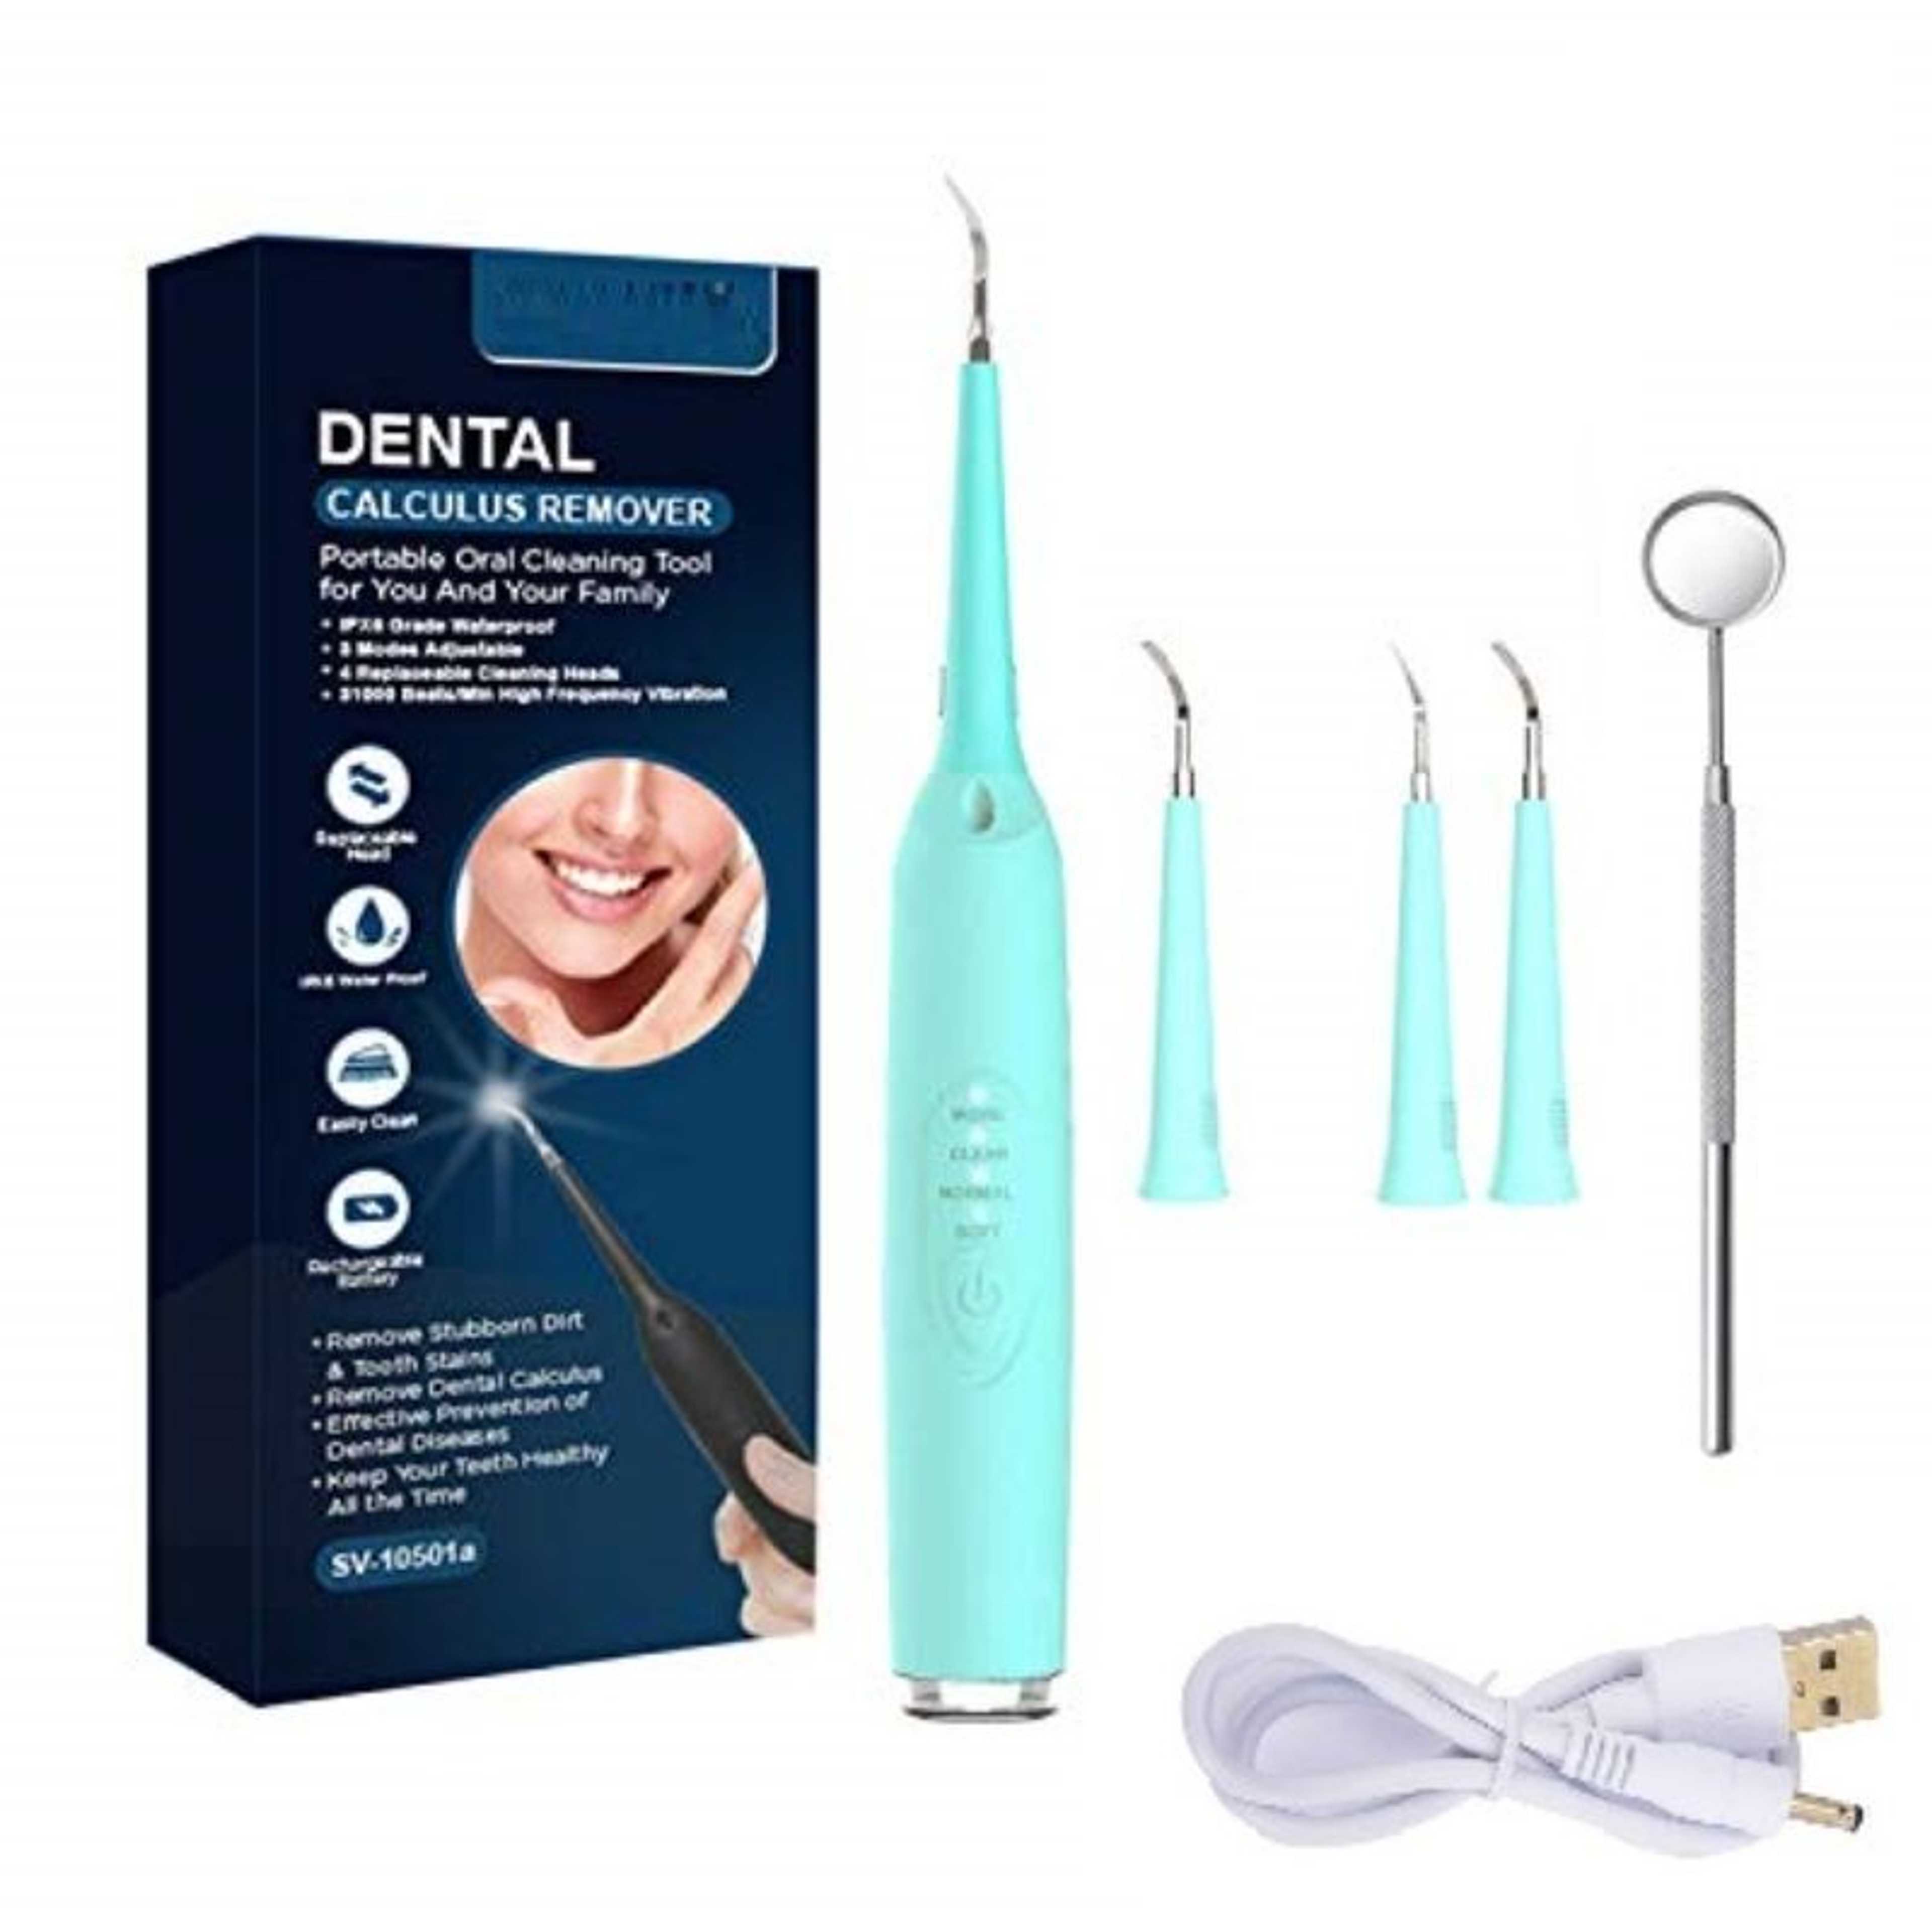 Electric Teeth Cleaner With 4 Replaceable Clean Heads, Electric Dental Calculation and Dirt Scaler, Electric Dental Calculus Remover, Ultrasonic Tooth Cleaner Portable Sonic Tartar Plaque Stain Remover For Teeth Cleaning